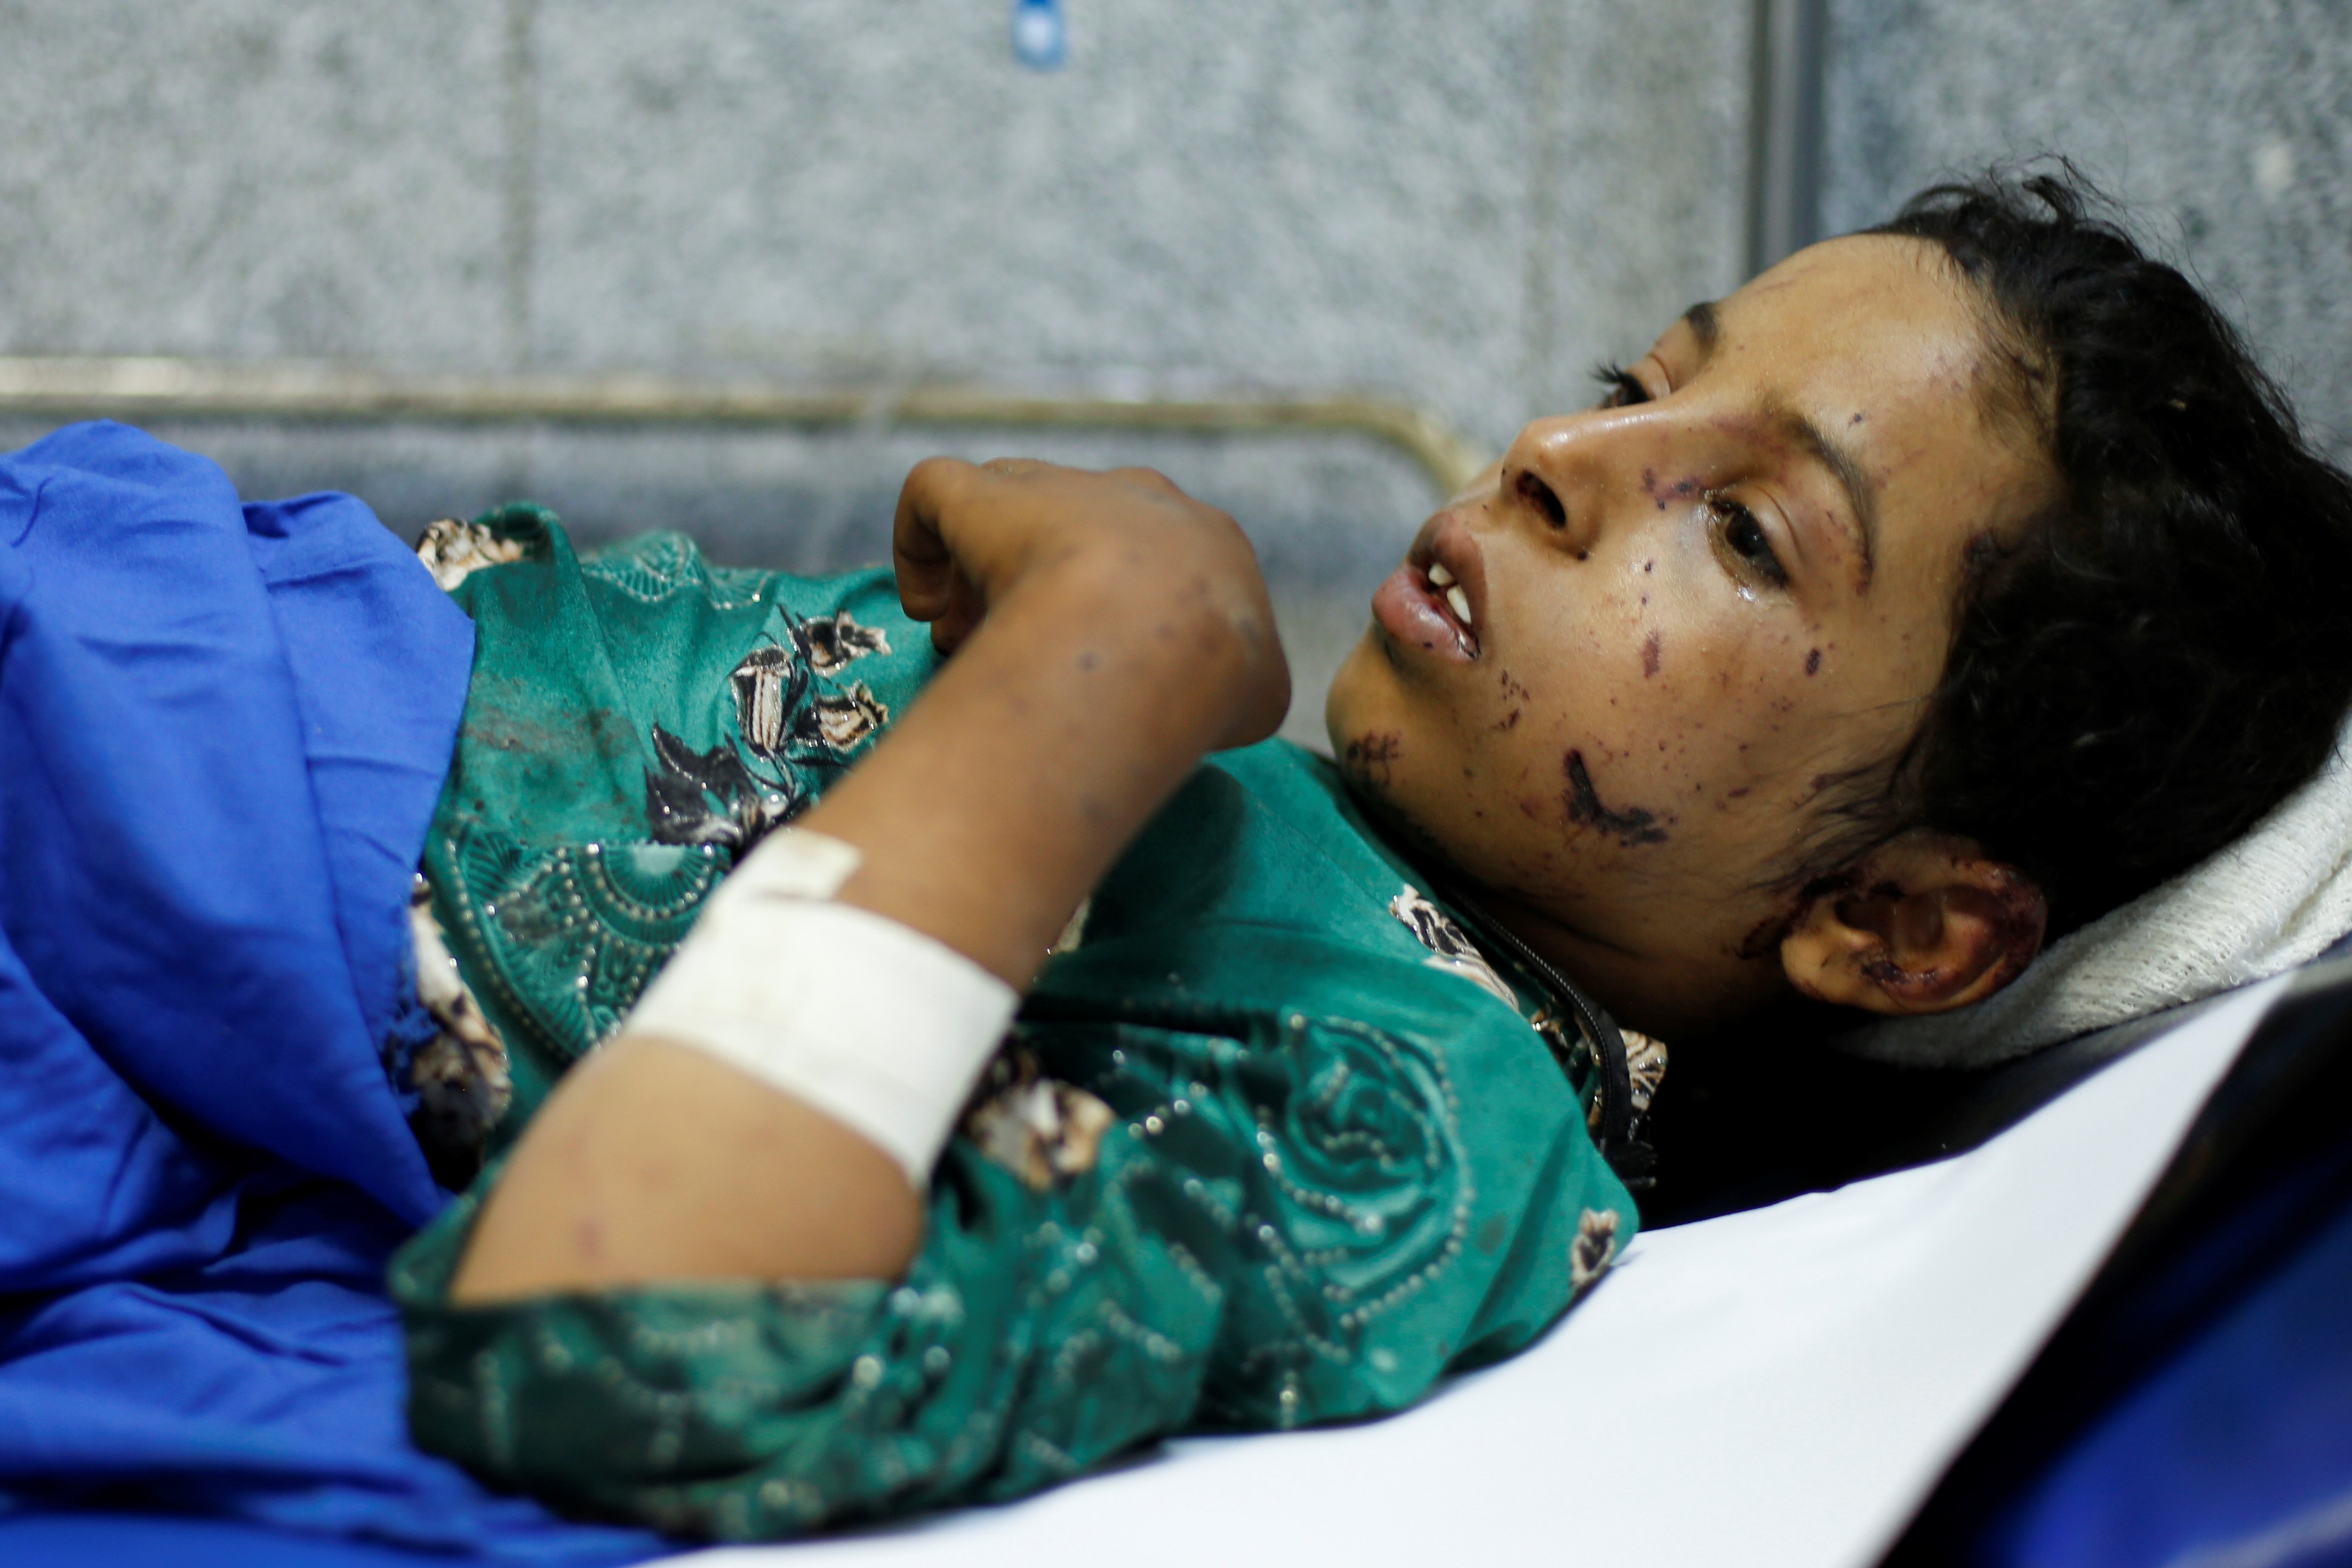 Qaboul Mabkhout Marzouq, 11, lies on a stretcher at a hospital in Sanaa after she was injured in an air strike in the northern province of al-Jawf, Yemen on 15 July, 2020 (Reuters)